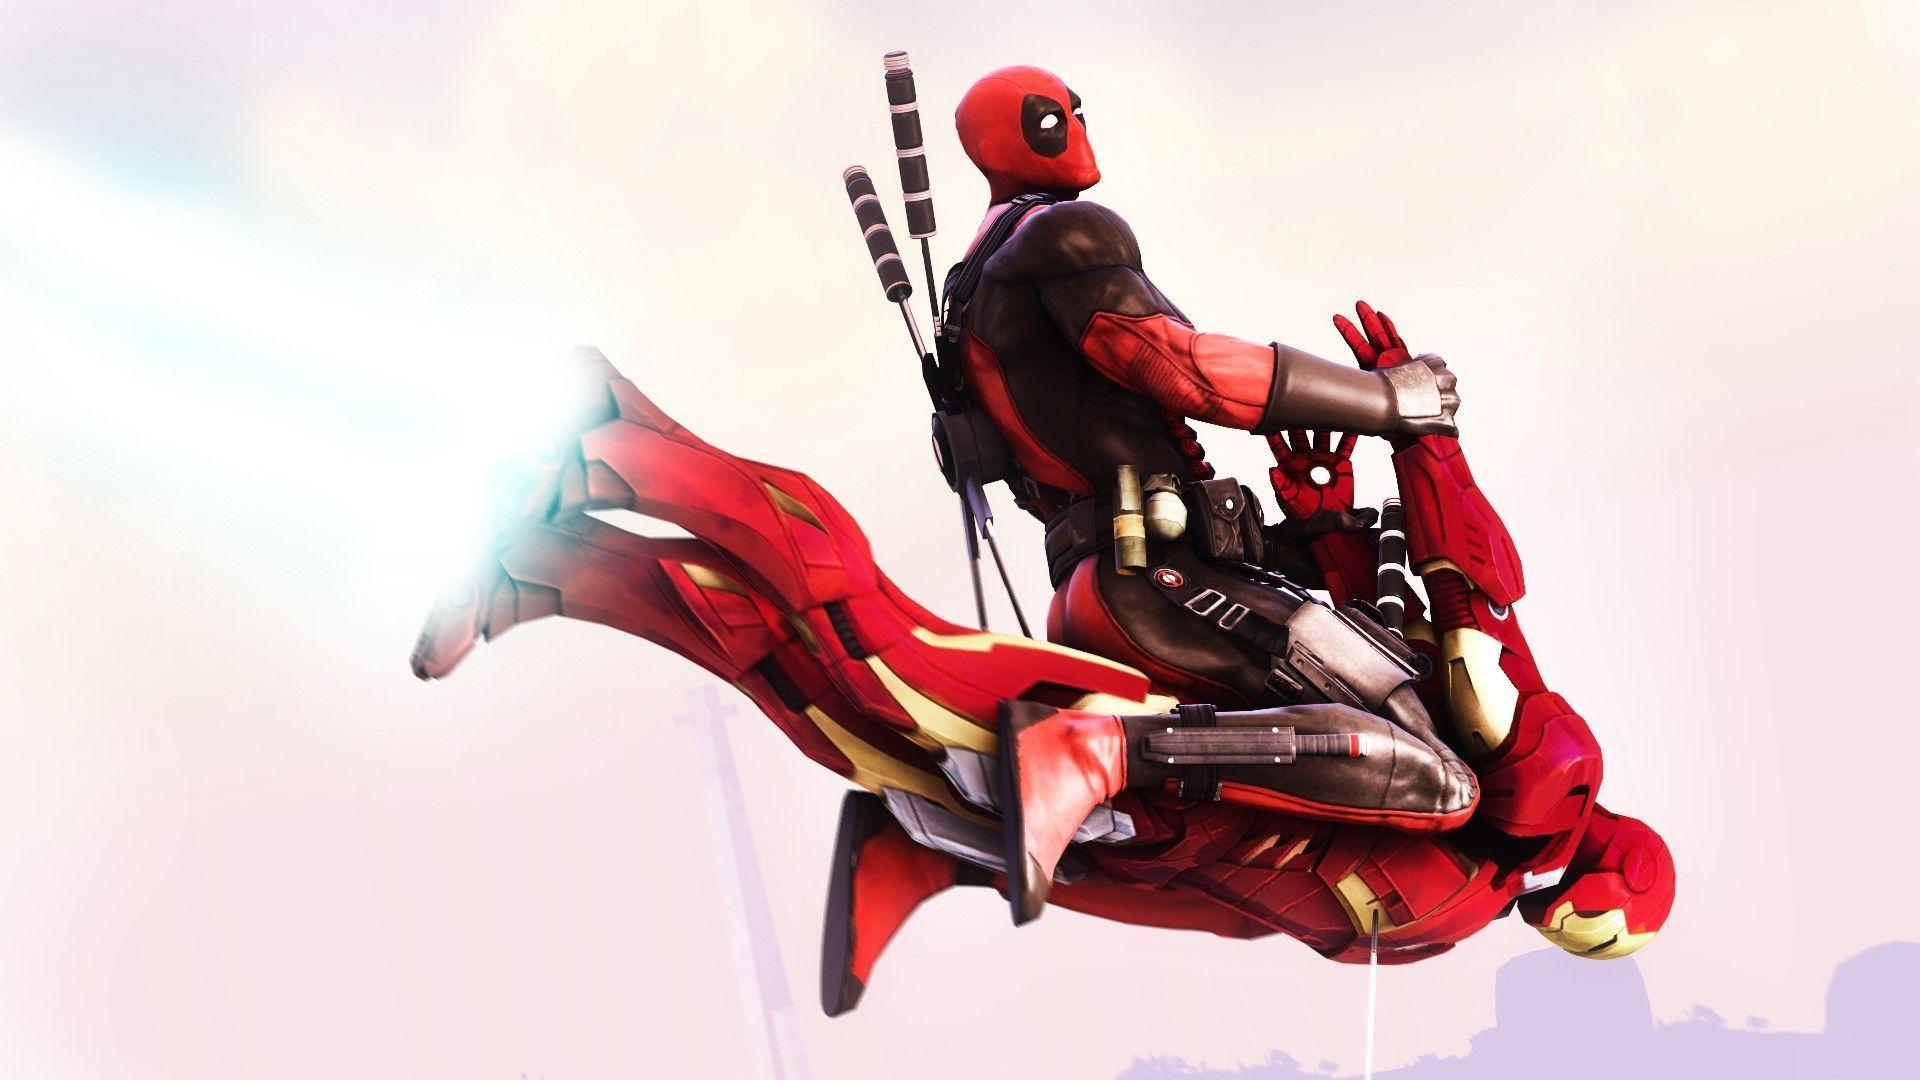 HD wallpaper deadpool super heroes movies funny safety representation   Wallpaper Flare